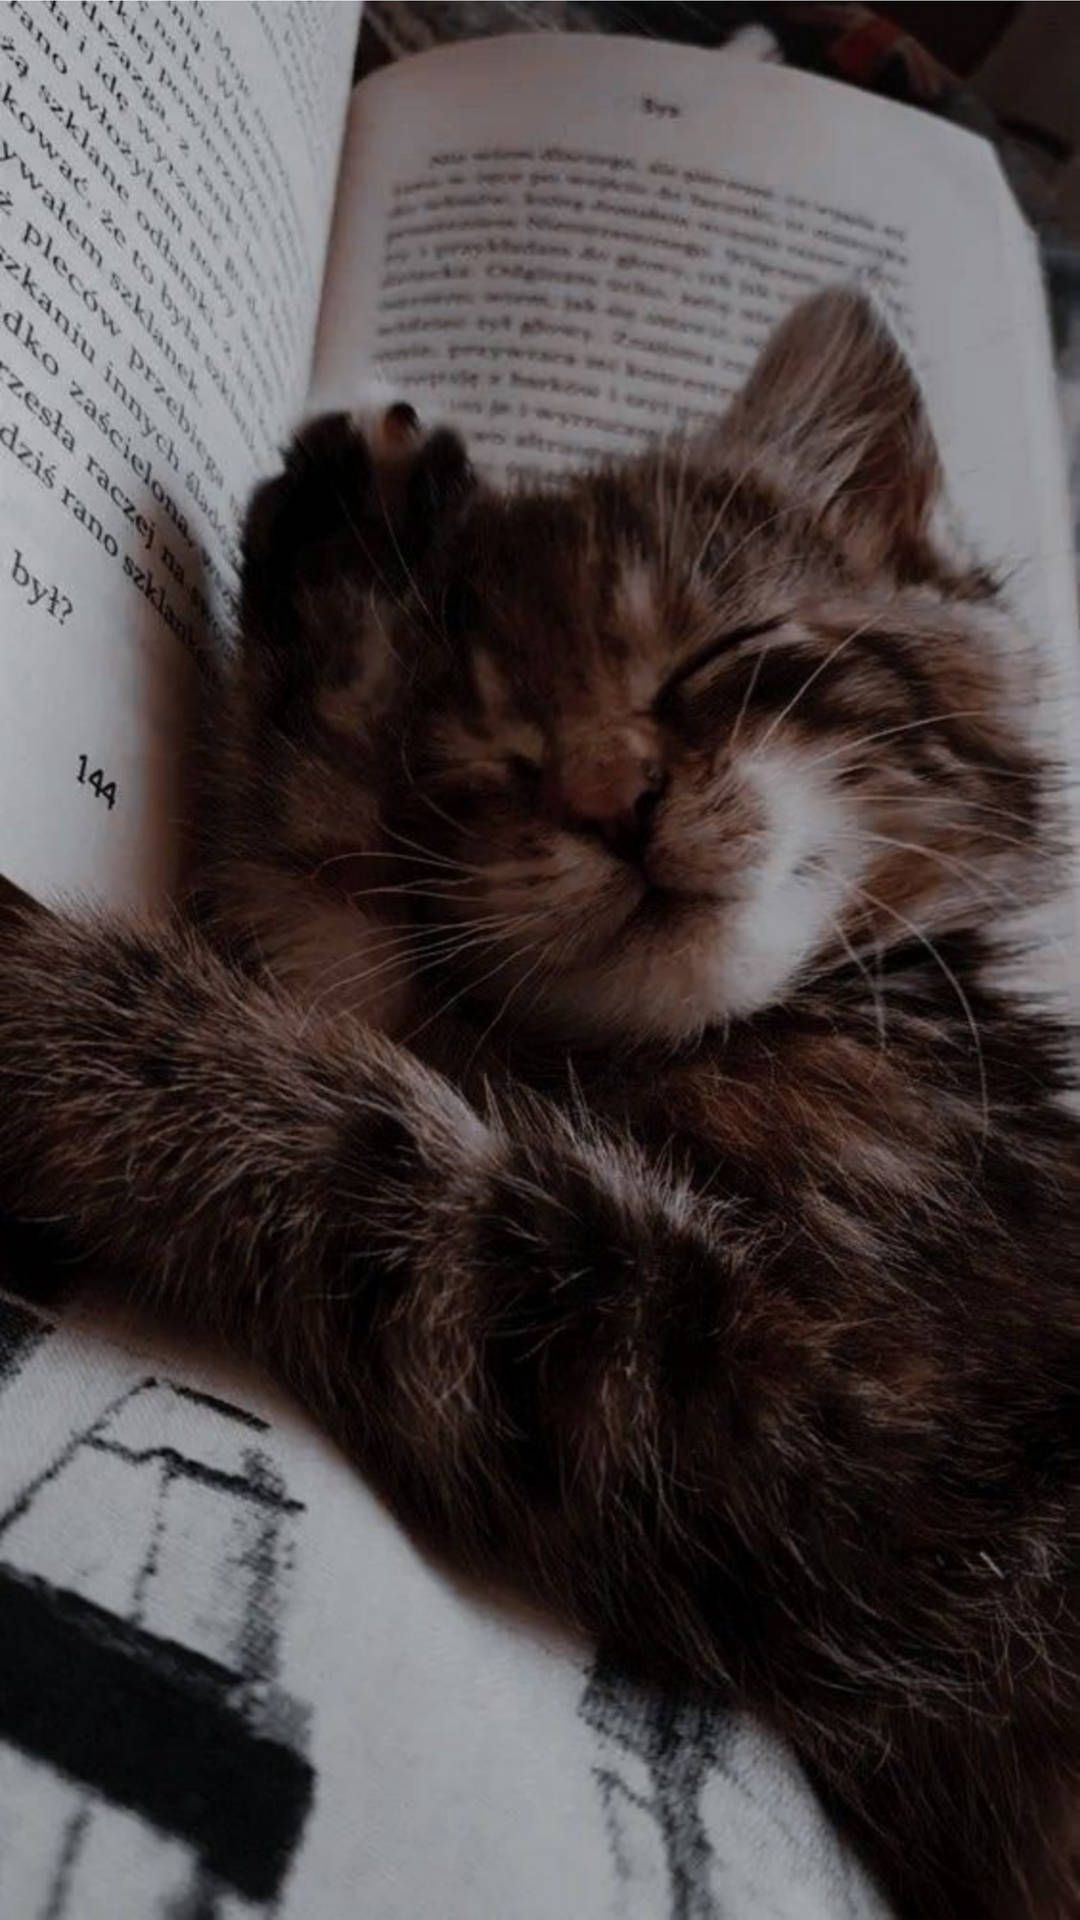 A Tranquil Moment - Cute Cat Aesthetically Sleeping on a Book Wallpaper